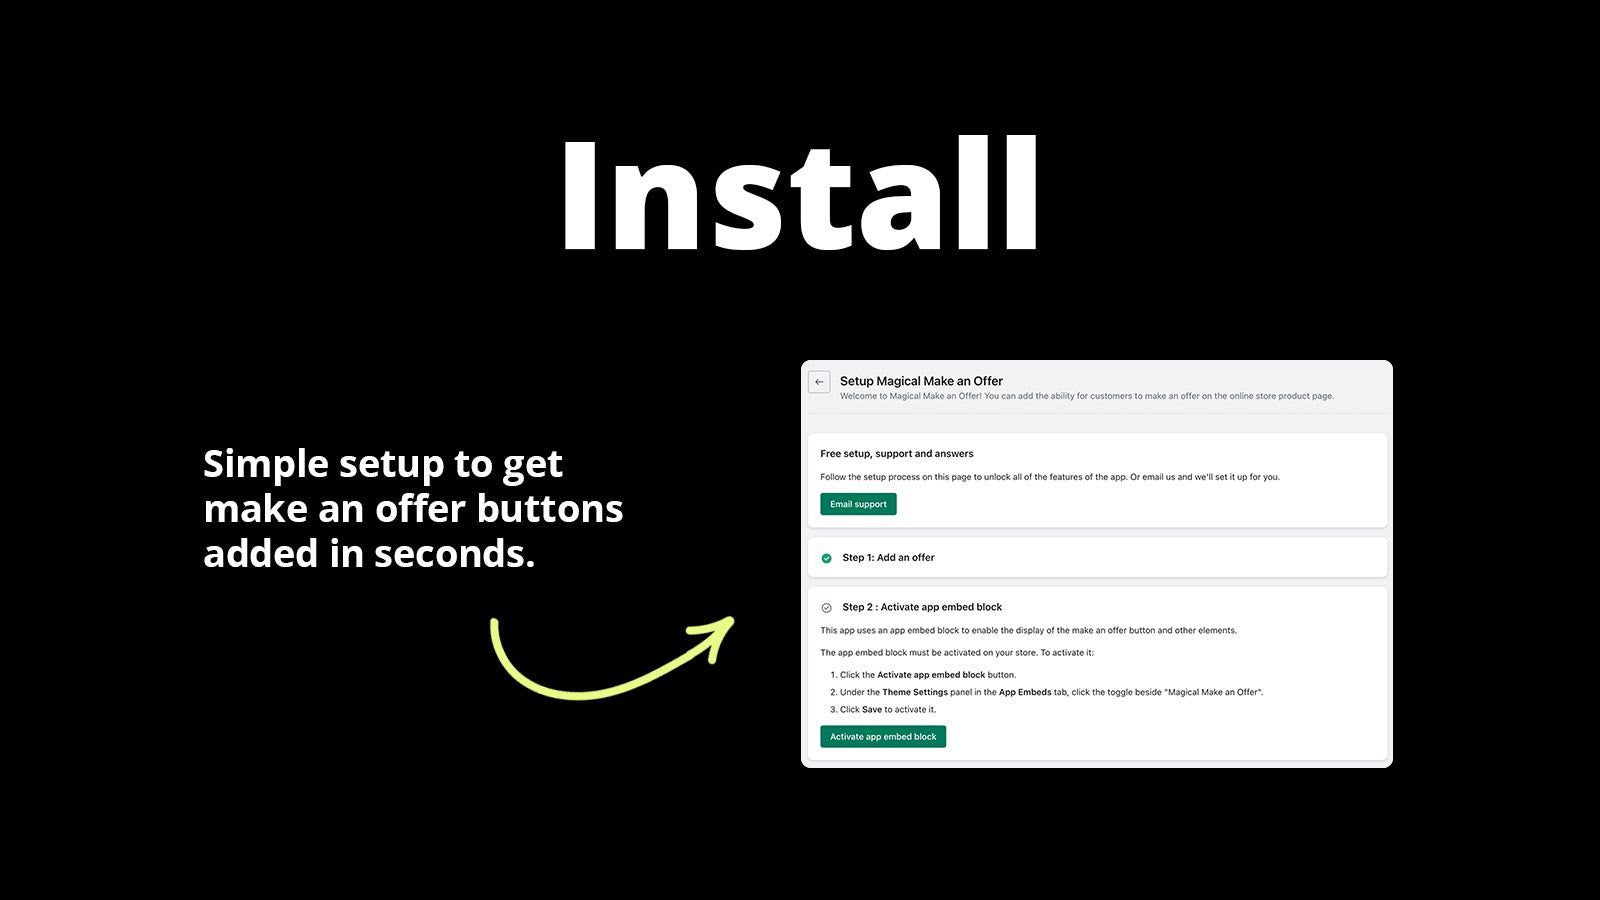 Install - Simple setup to get make an offer buttons added fast.